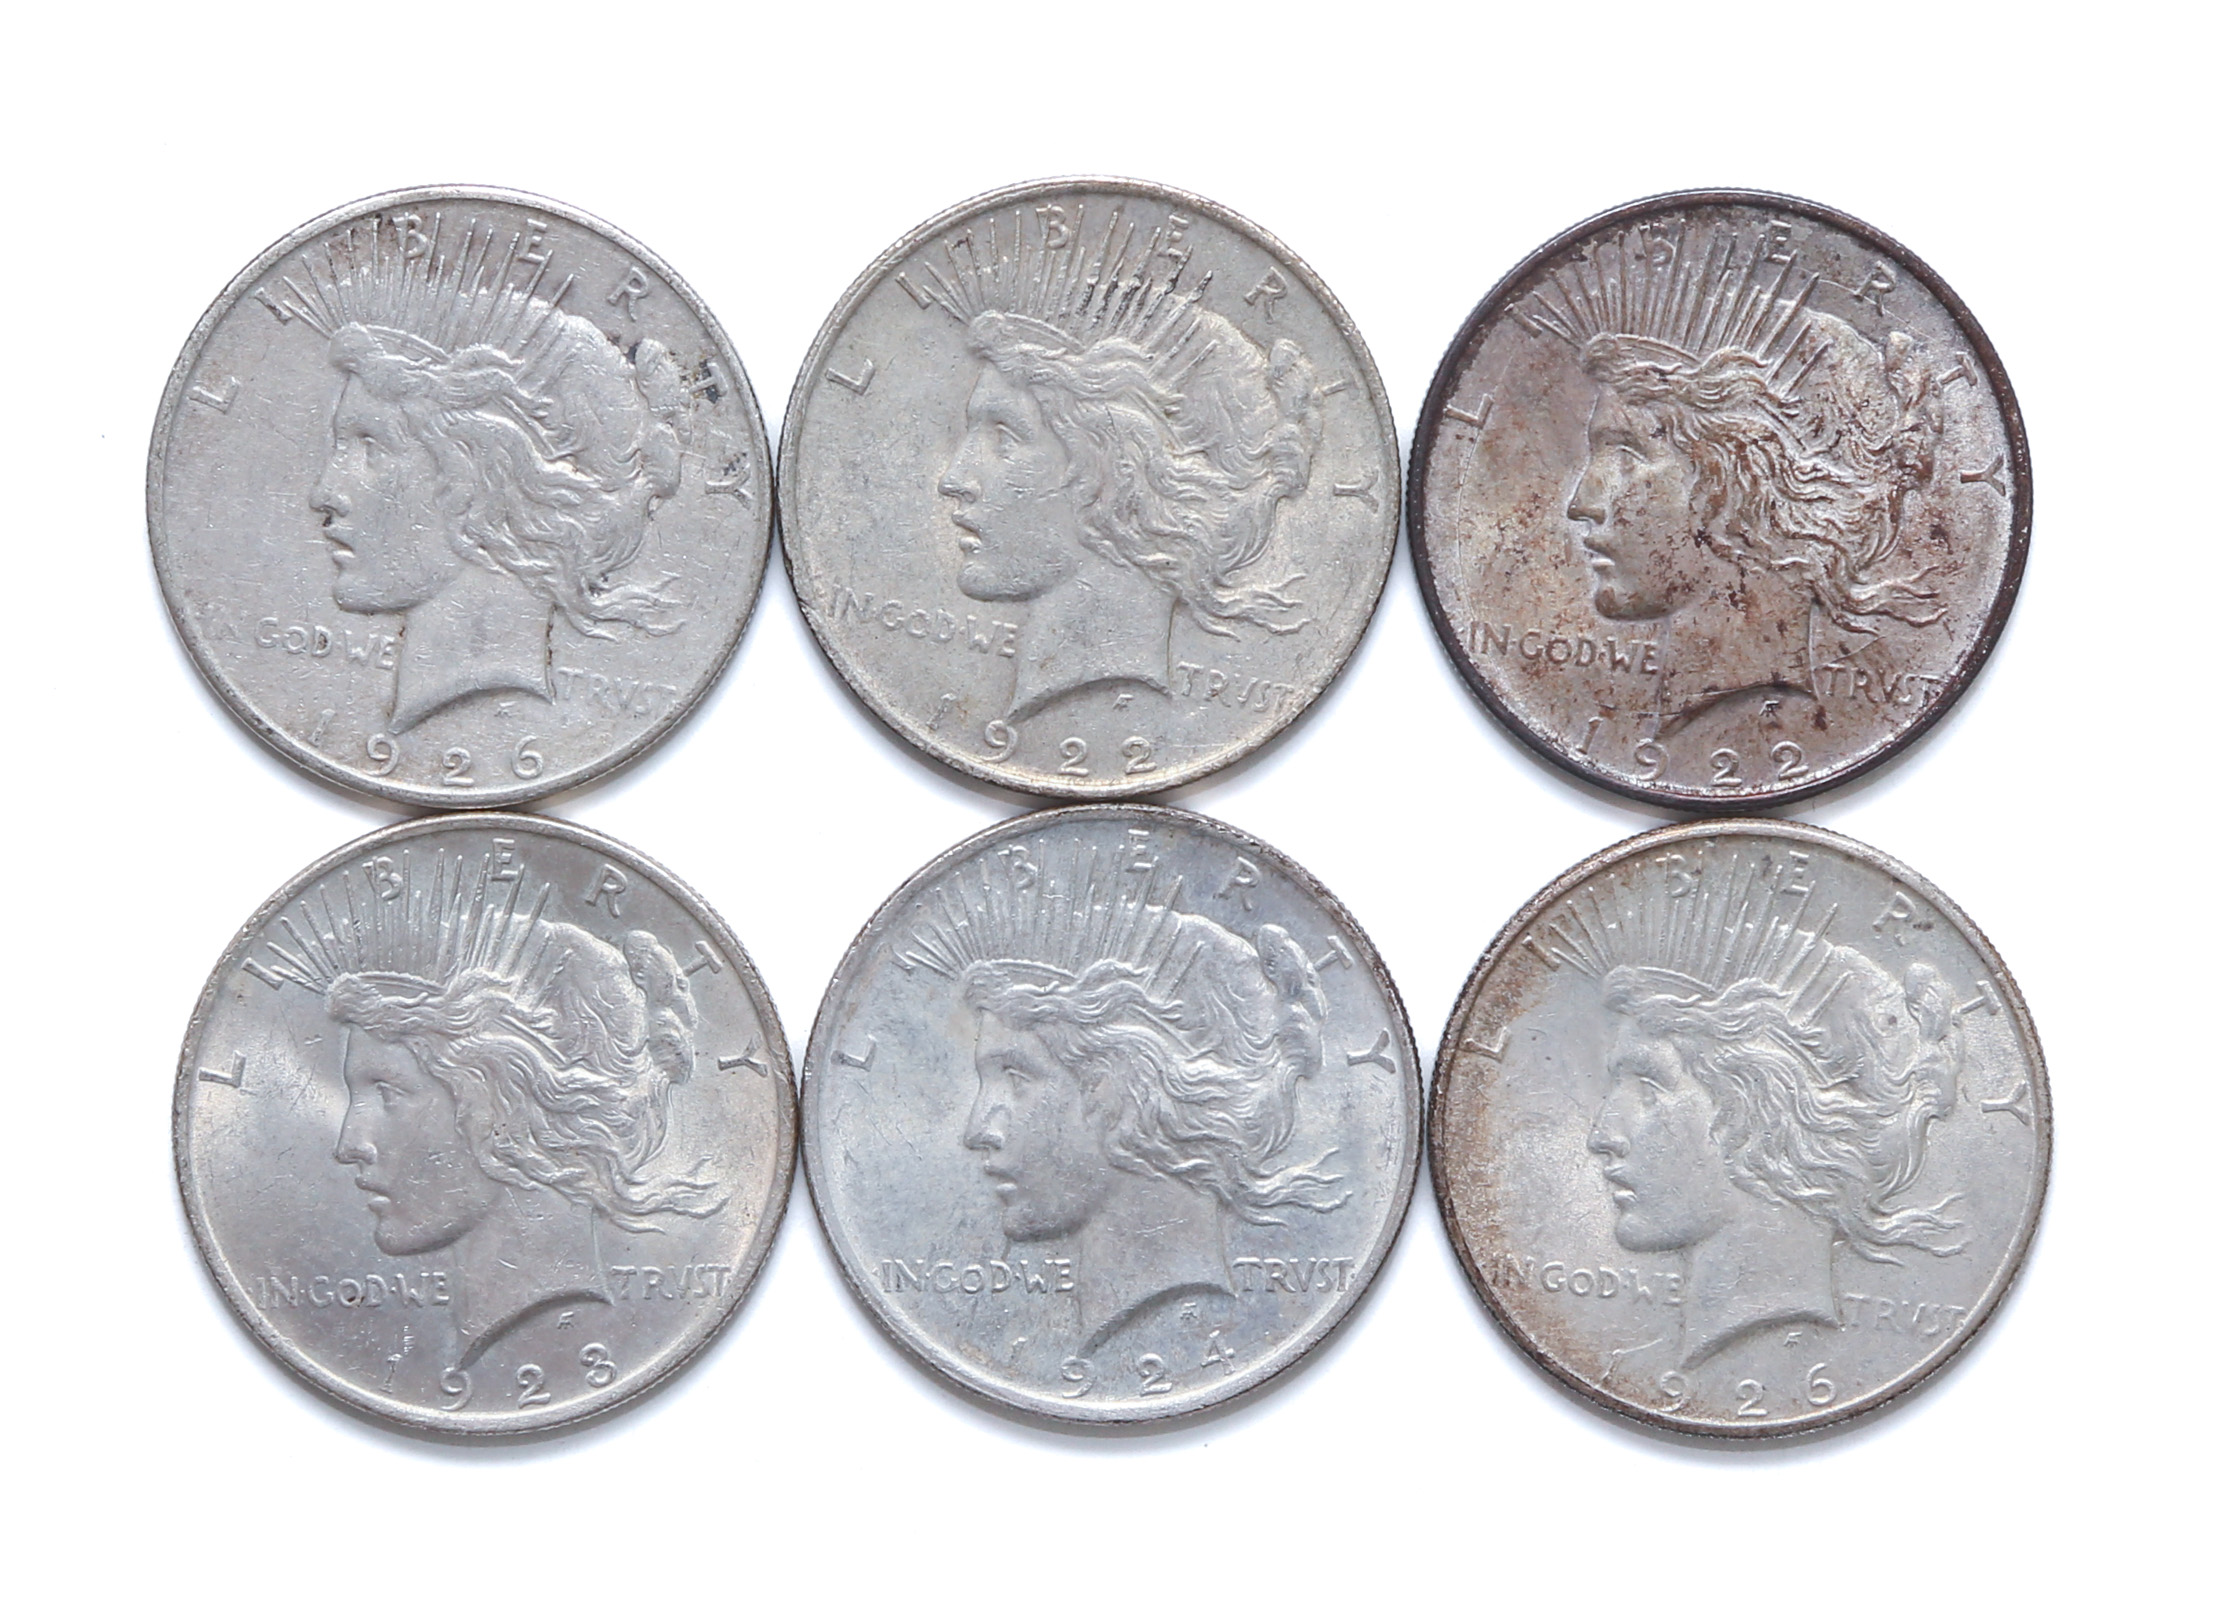 SIX DIFFERENT PEACE DOLLARS 1922